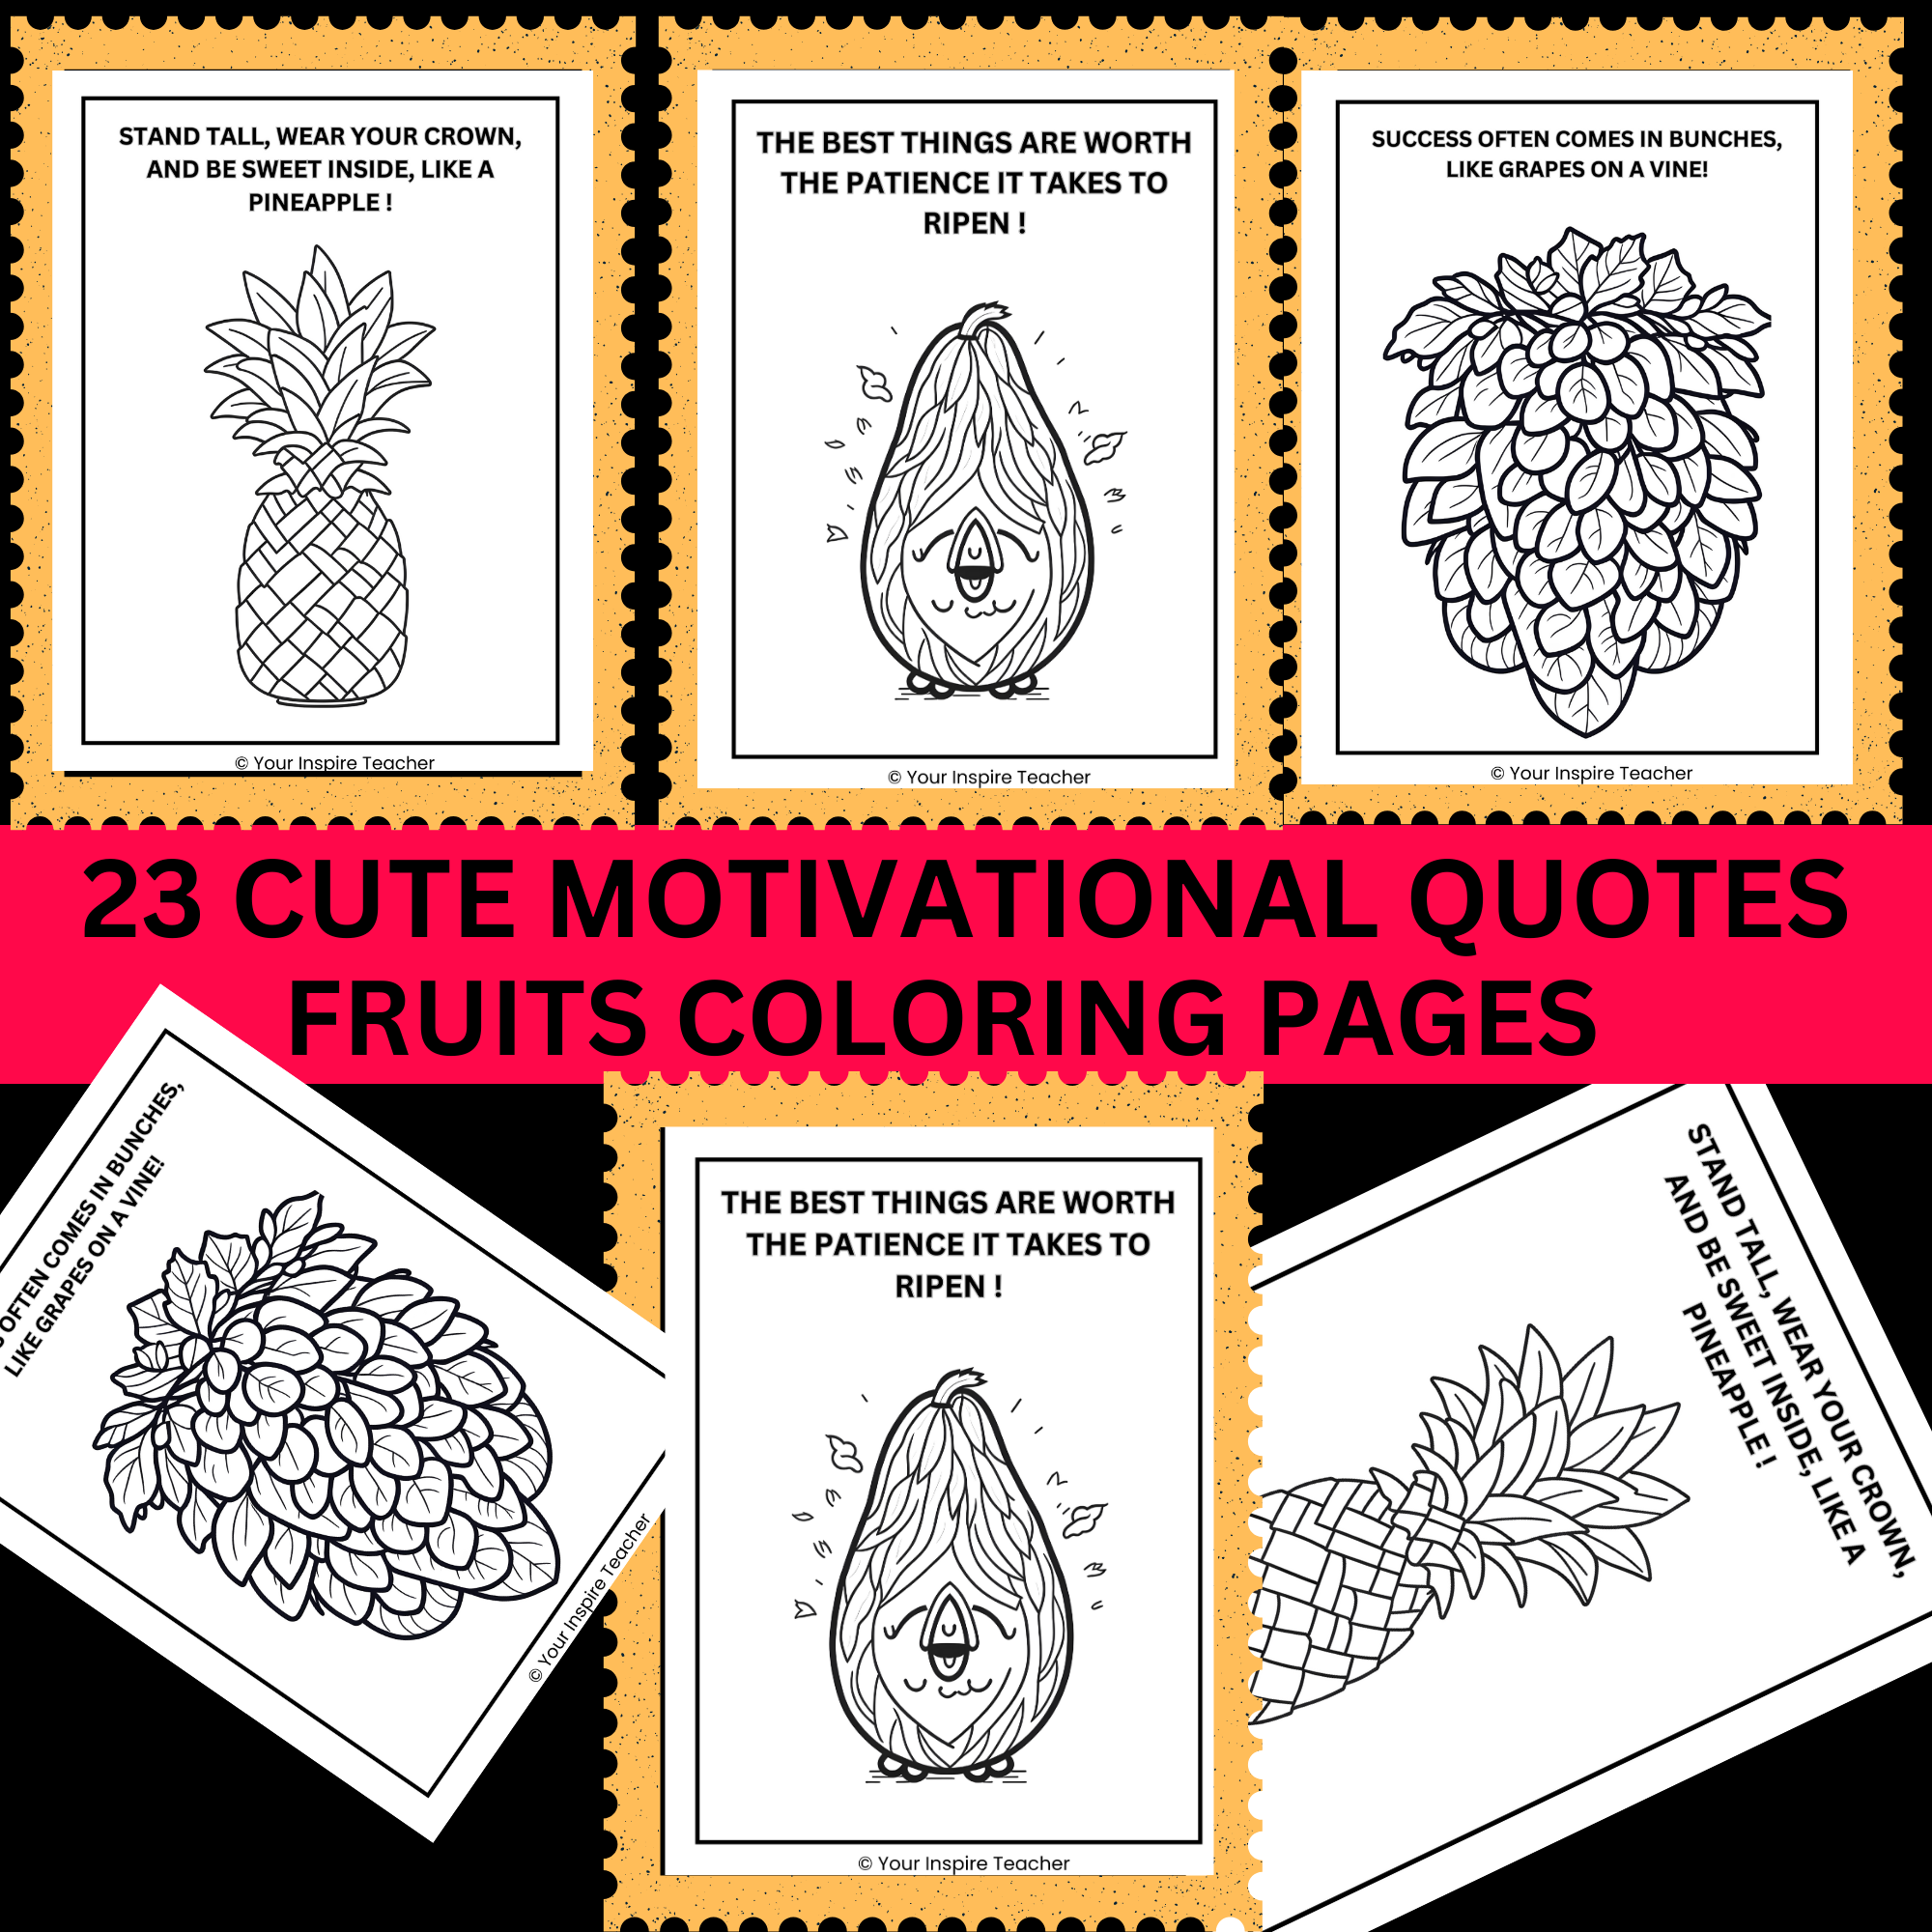 Unique and cute fruits coloring pages with inspirational quotes